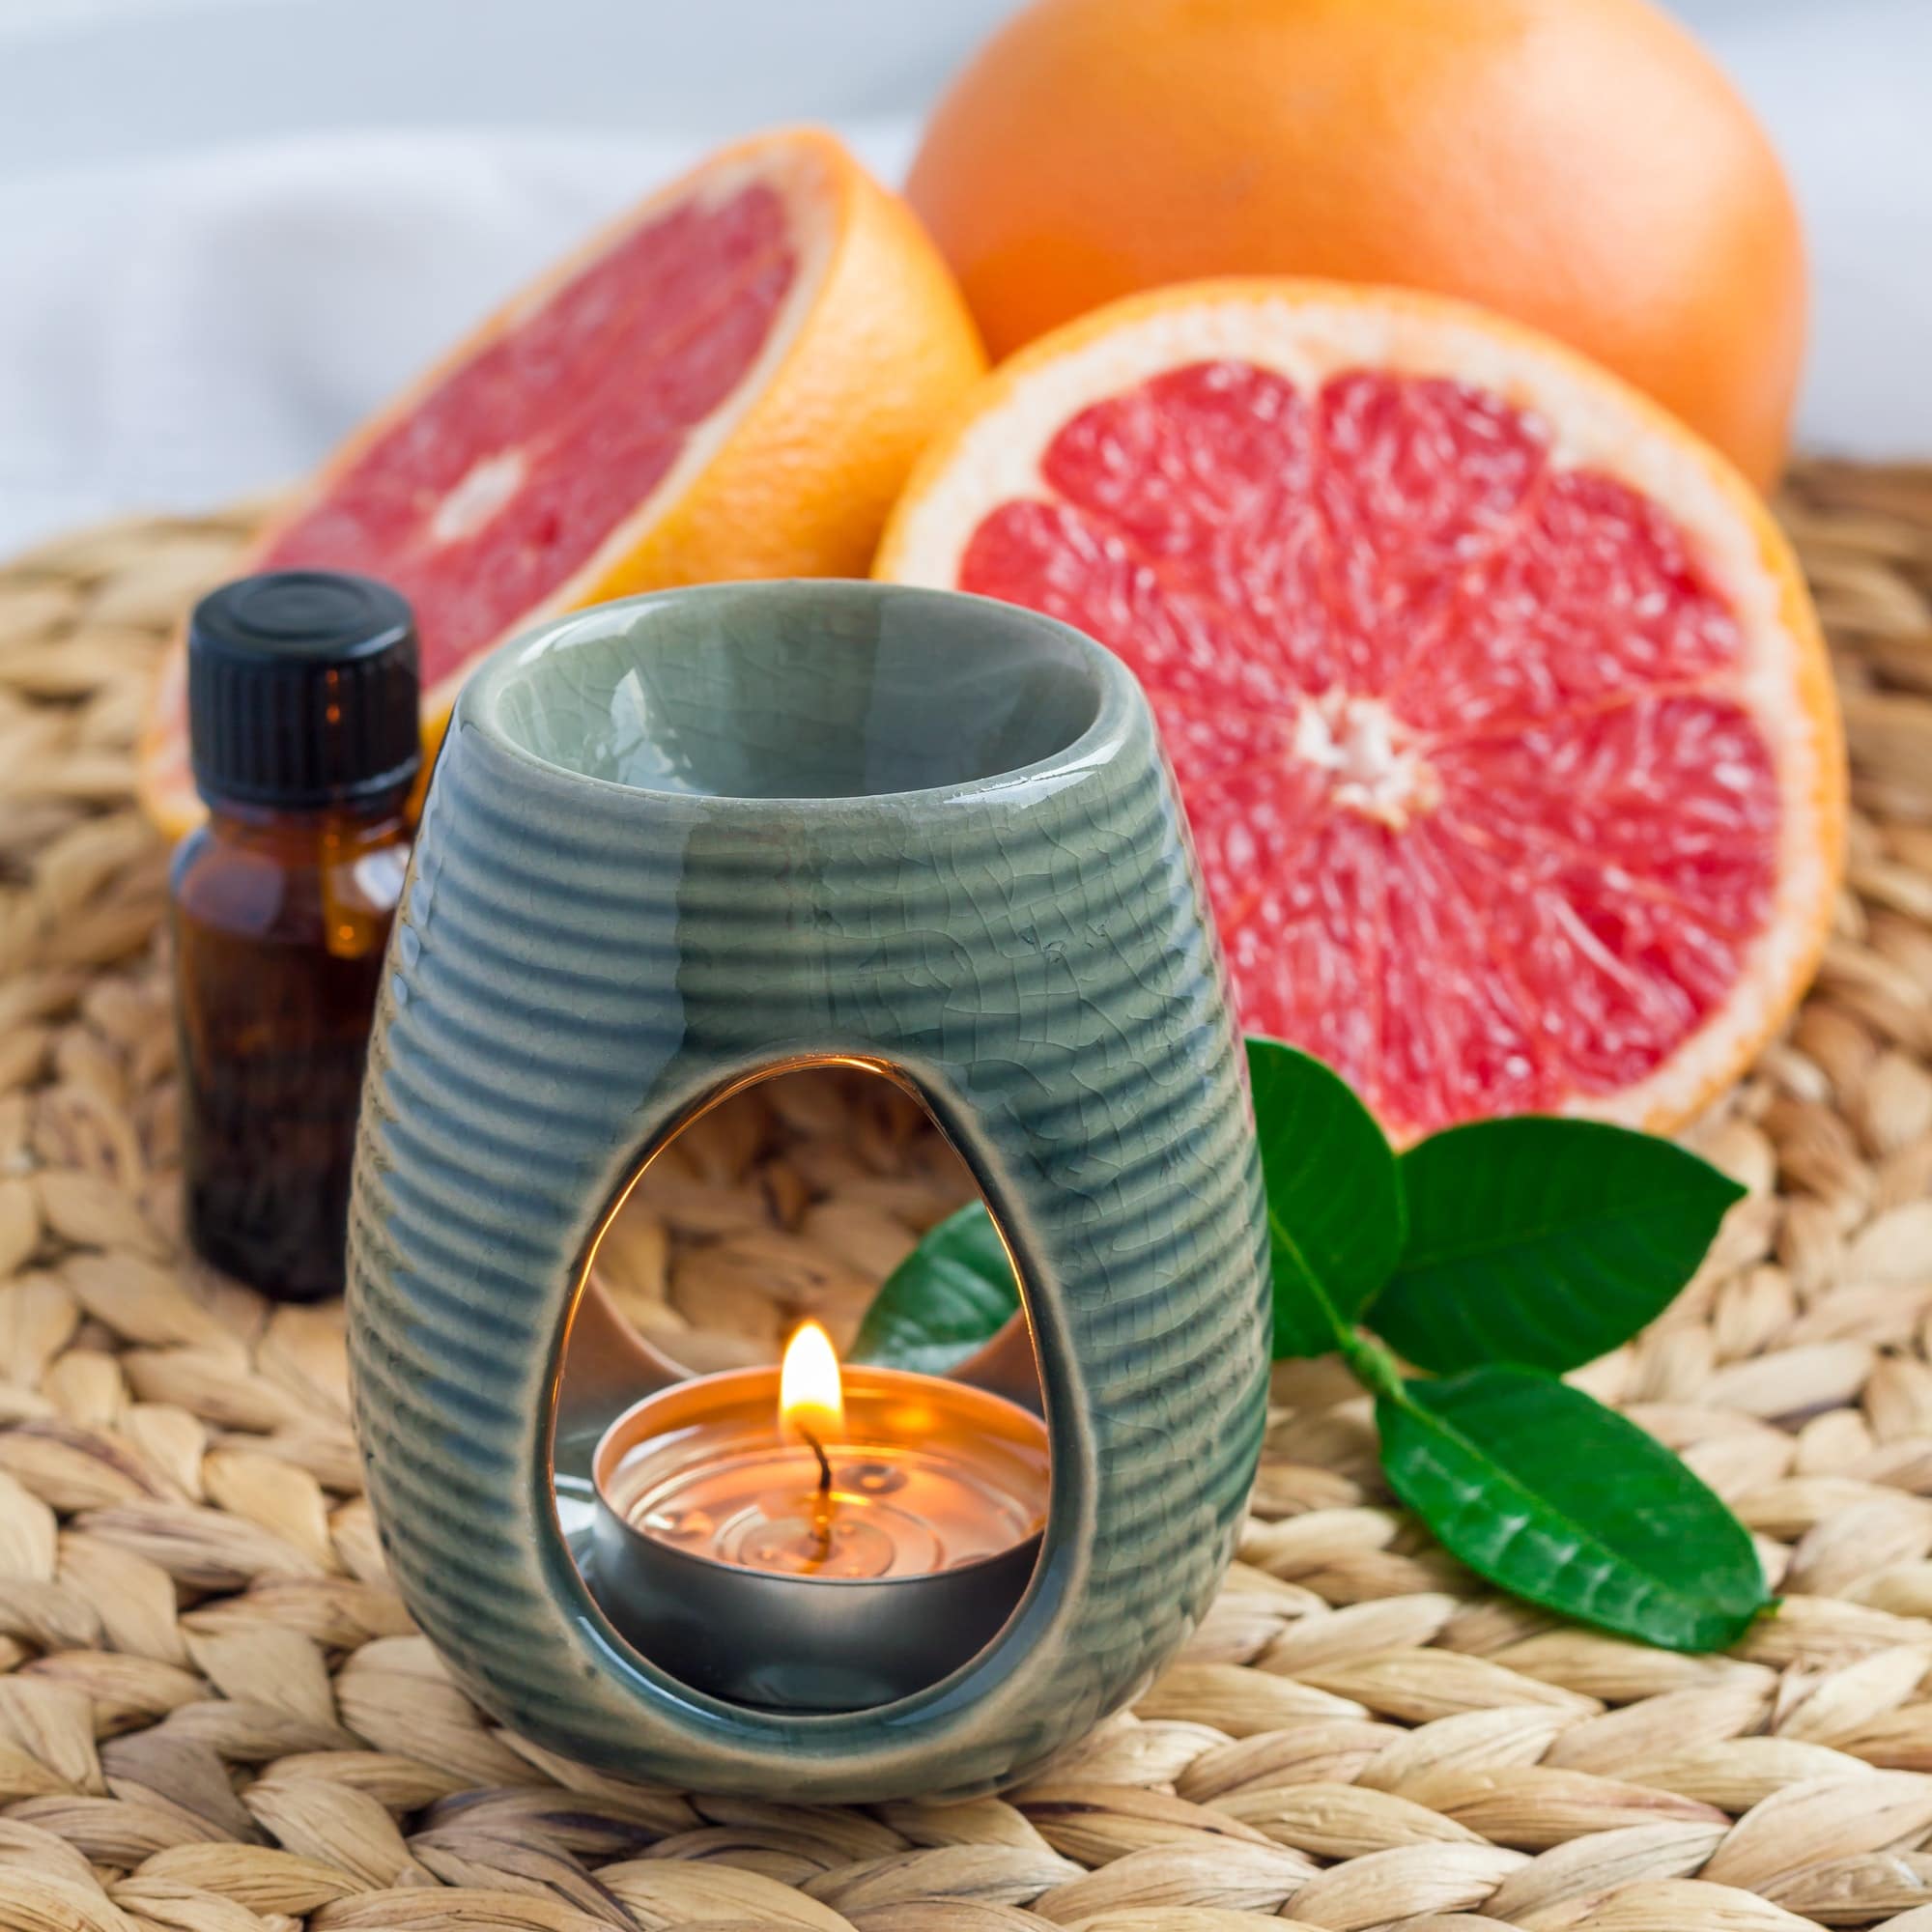 Aroma lamp with grapefruit essential oil on woven mat, grapefruits on background, square format